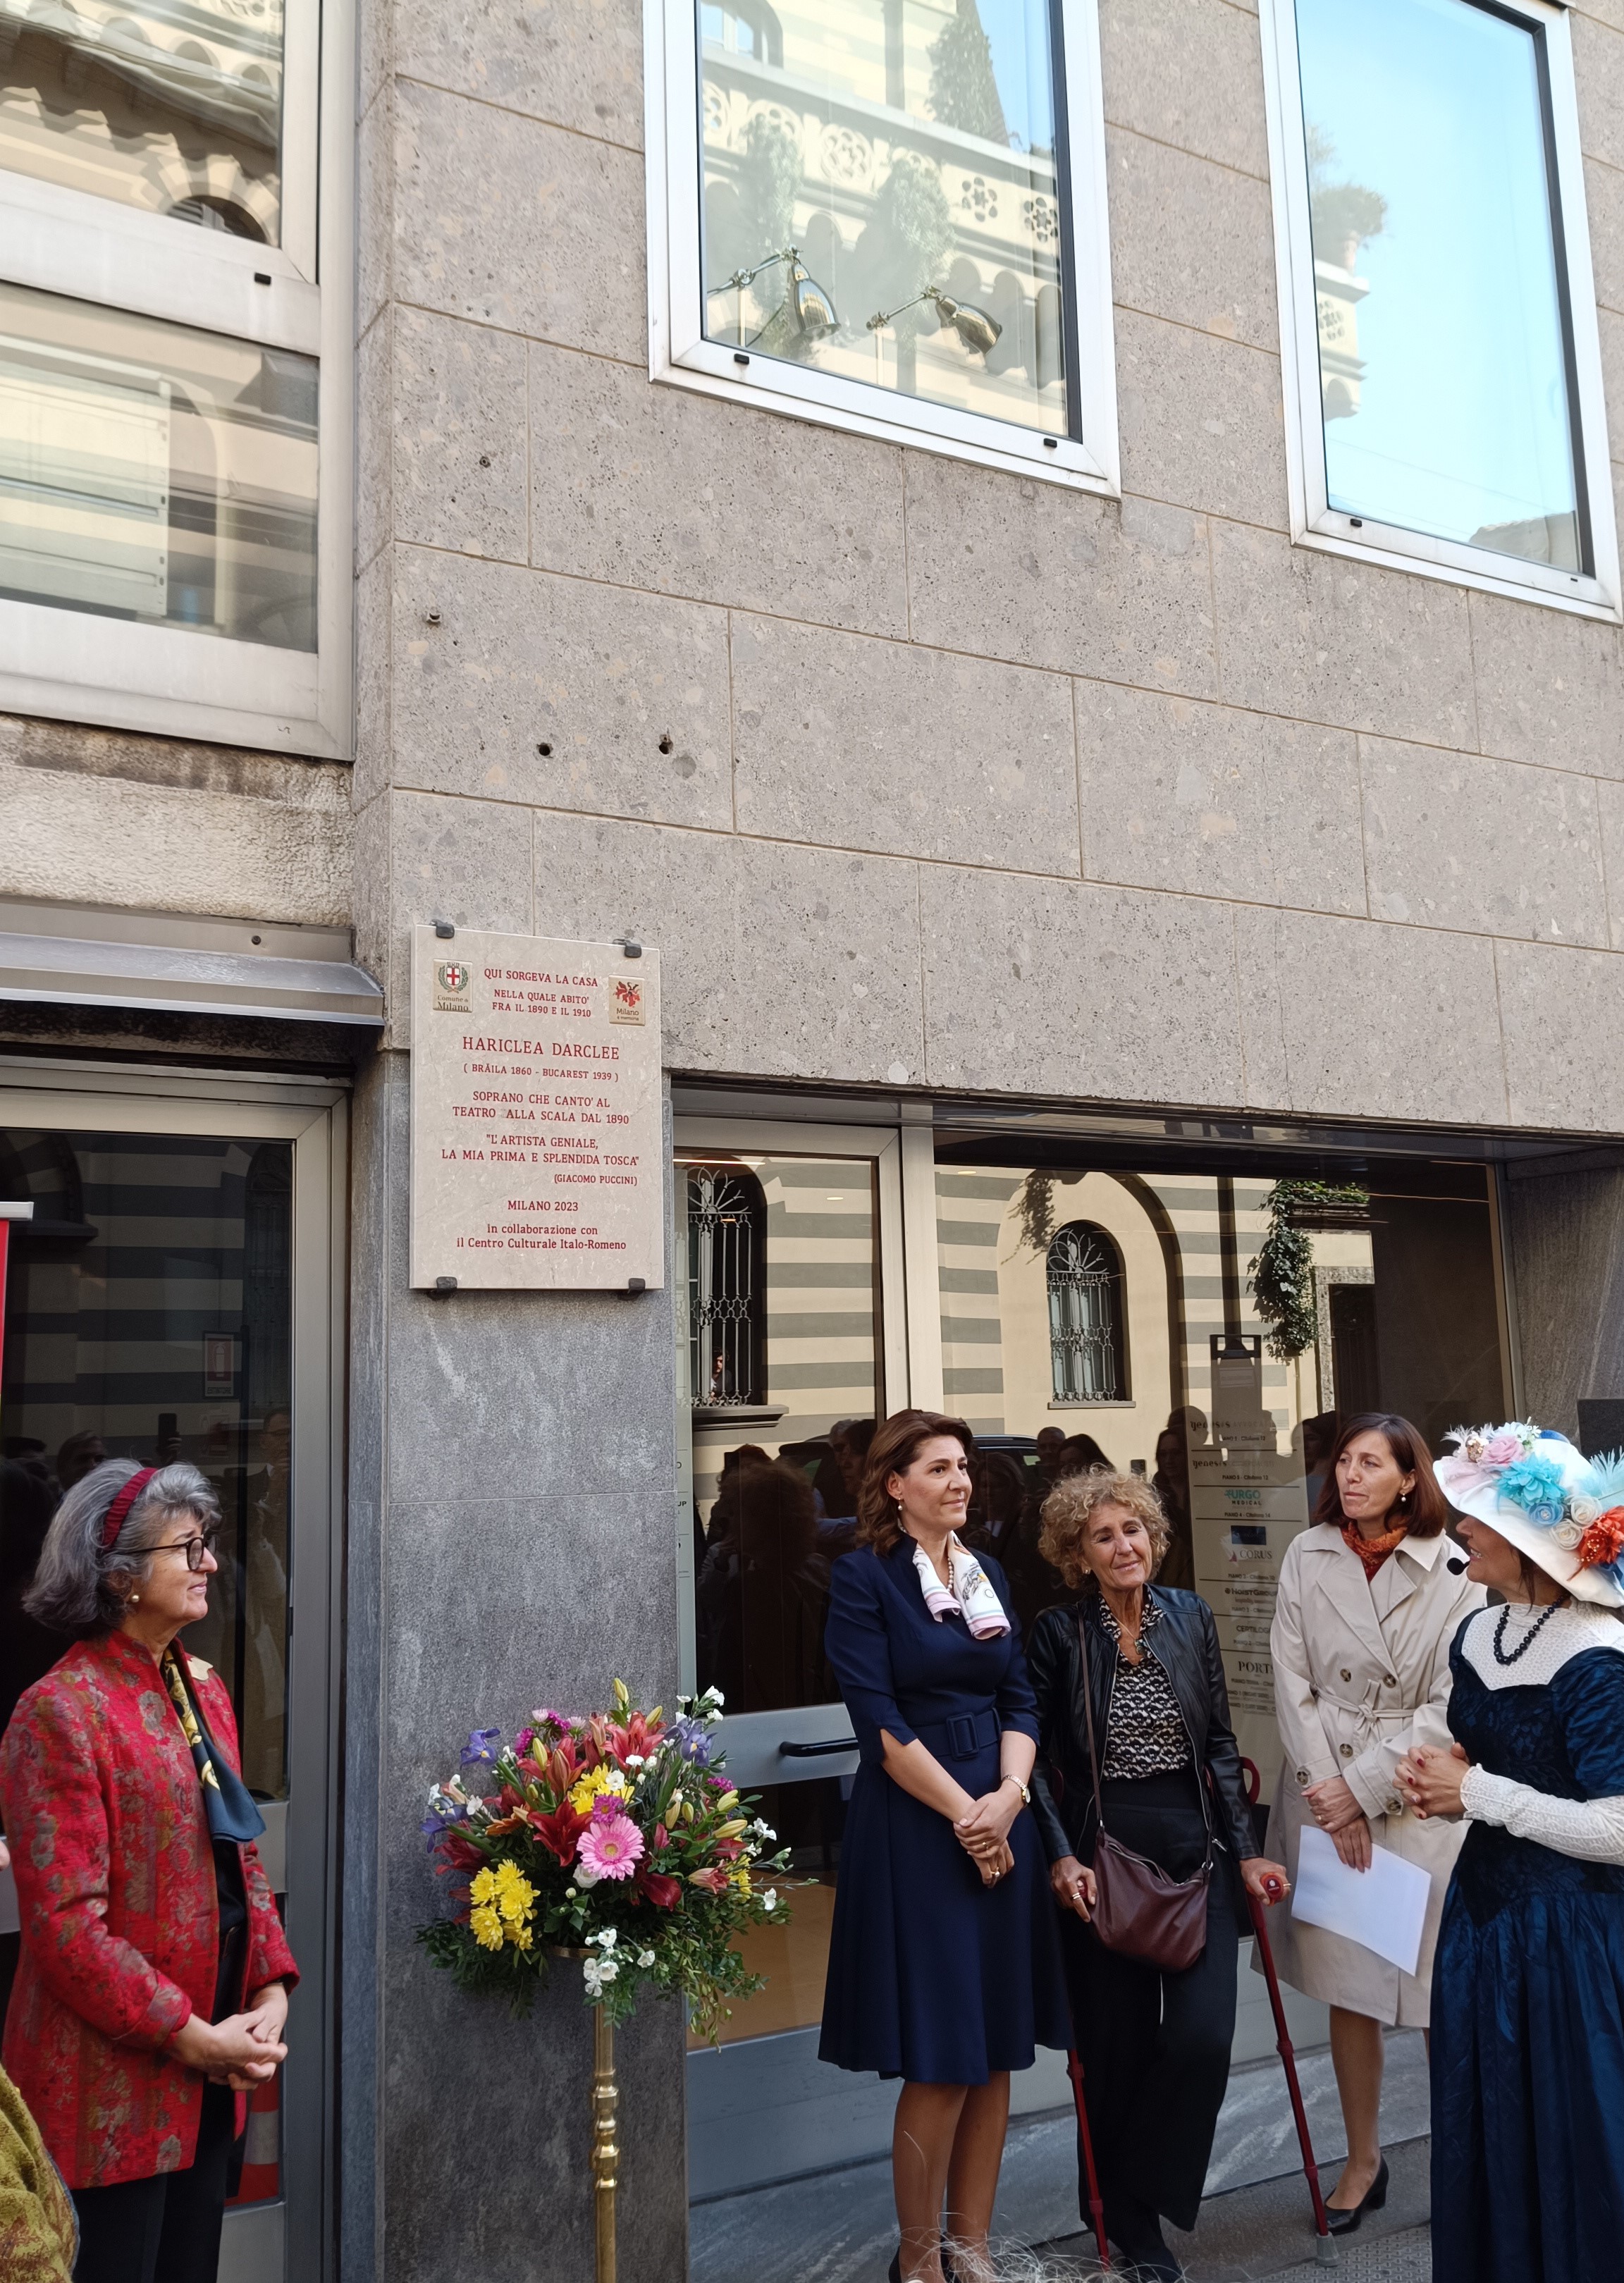 Milan remembers Hariclea Darclée with a plaque in via Cernaia